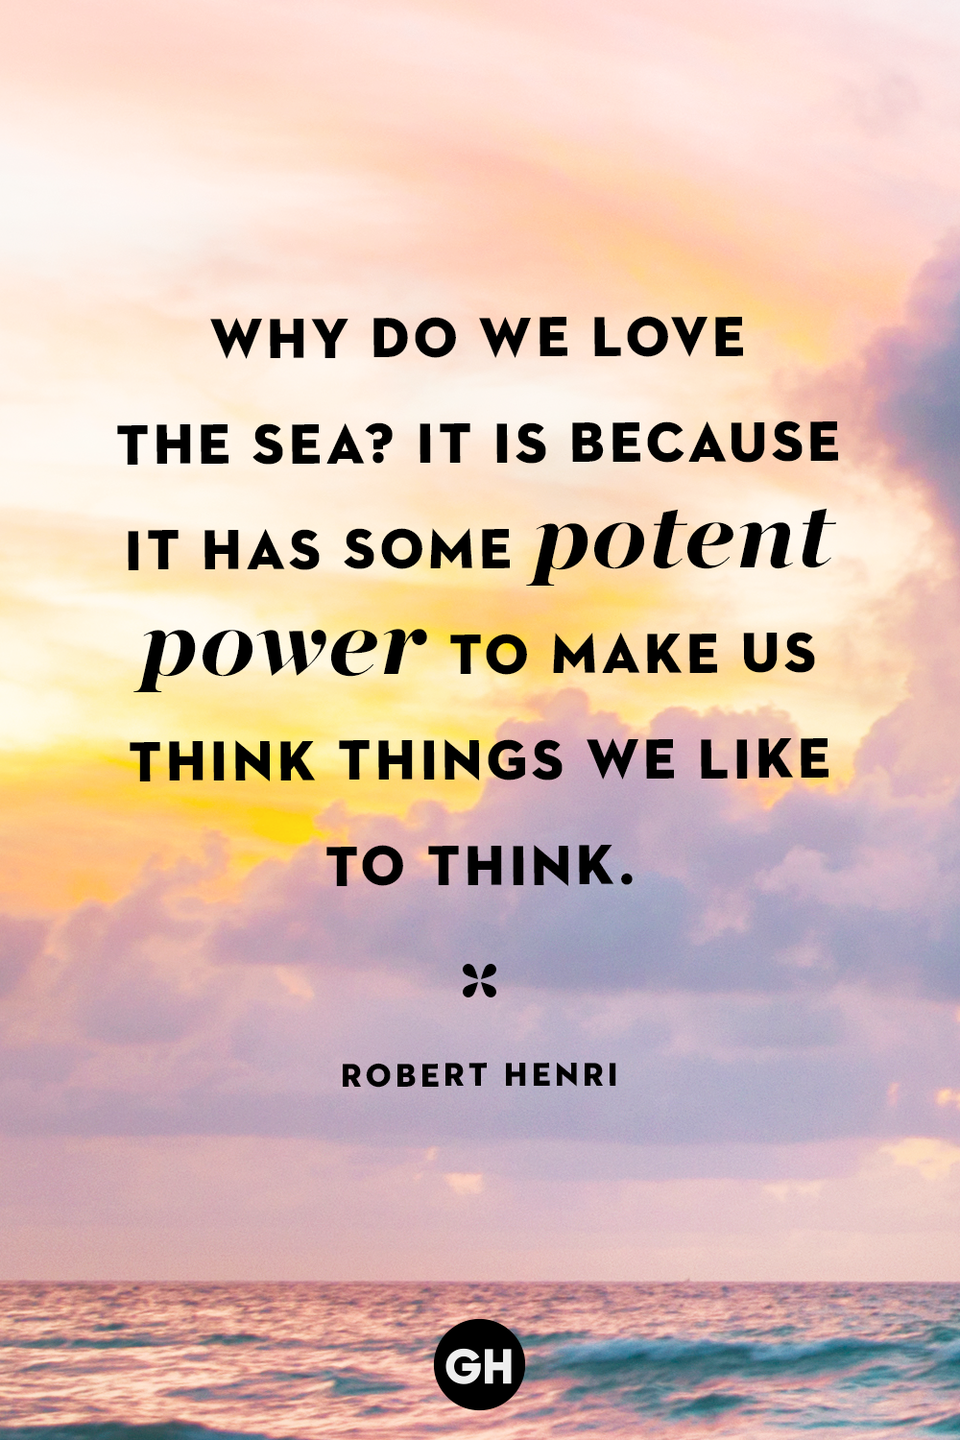 <p>Why do we love the sea? It is because it has some potent power to make us think things we like to think.</p>